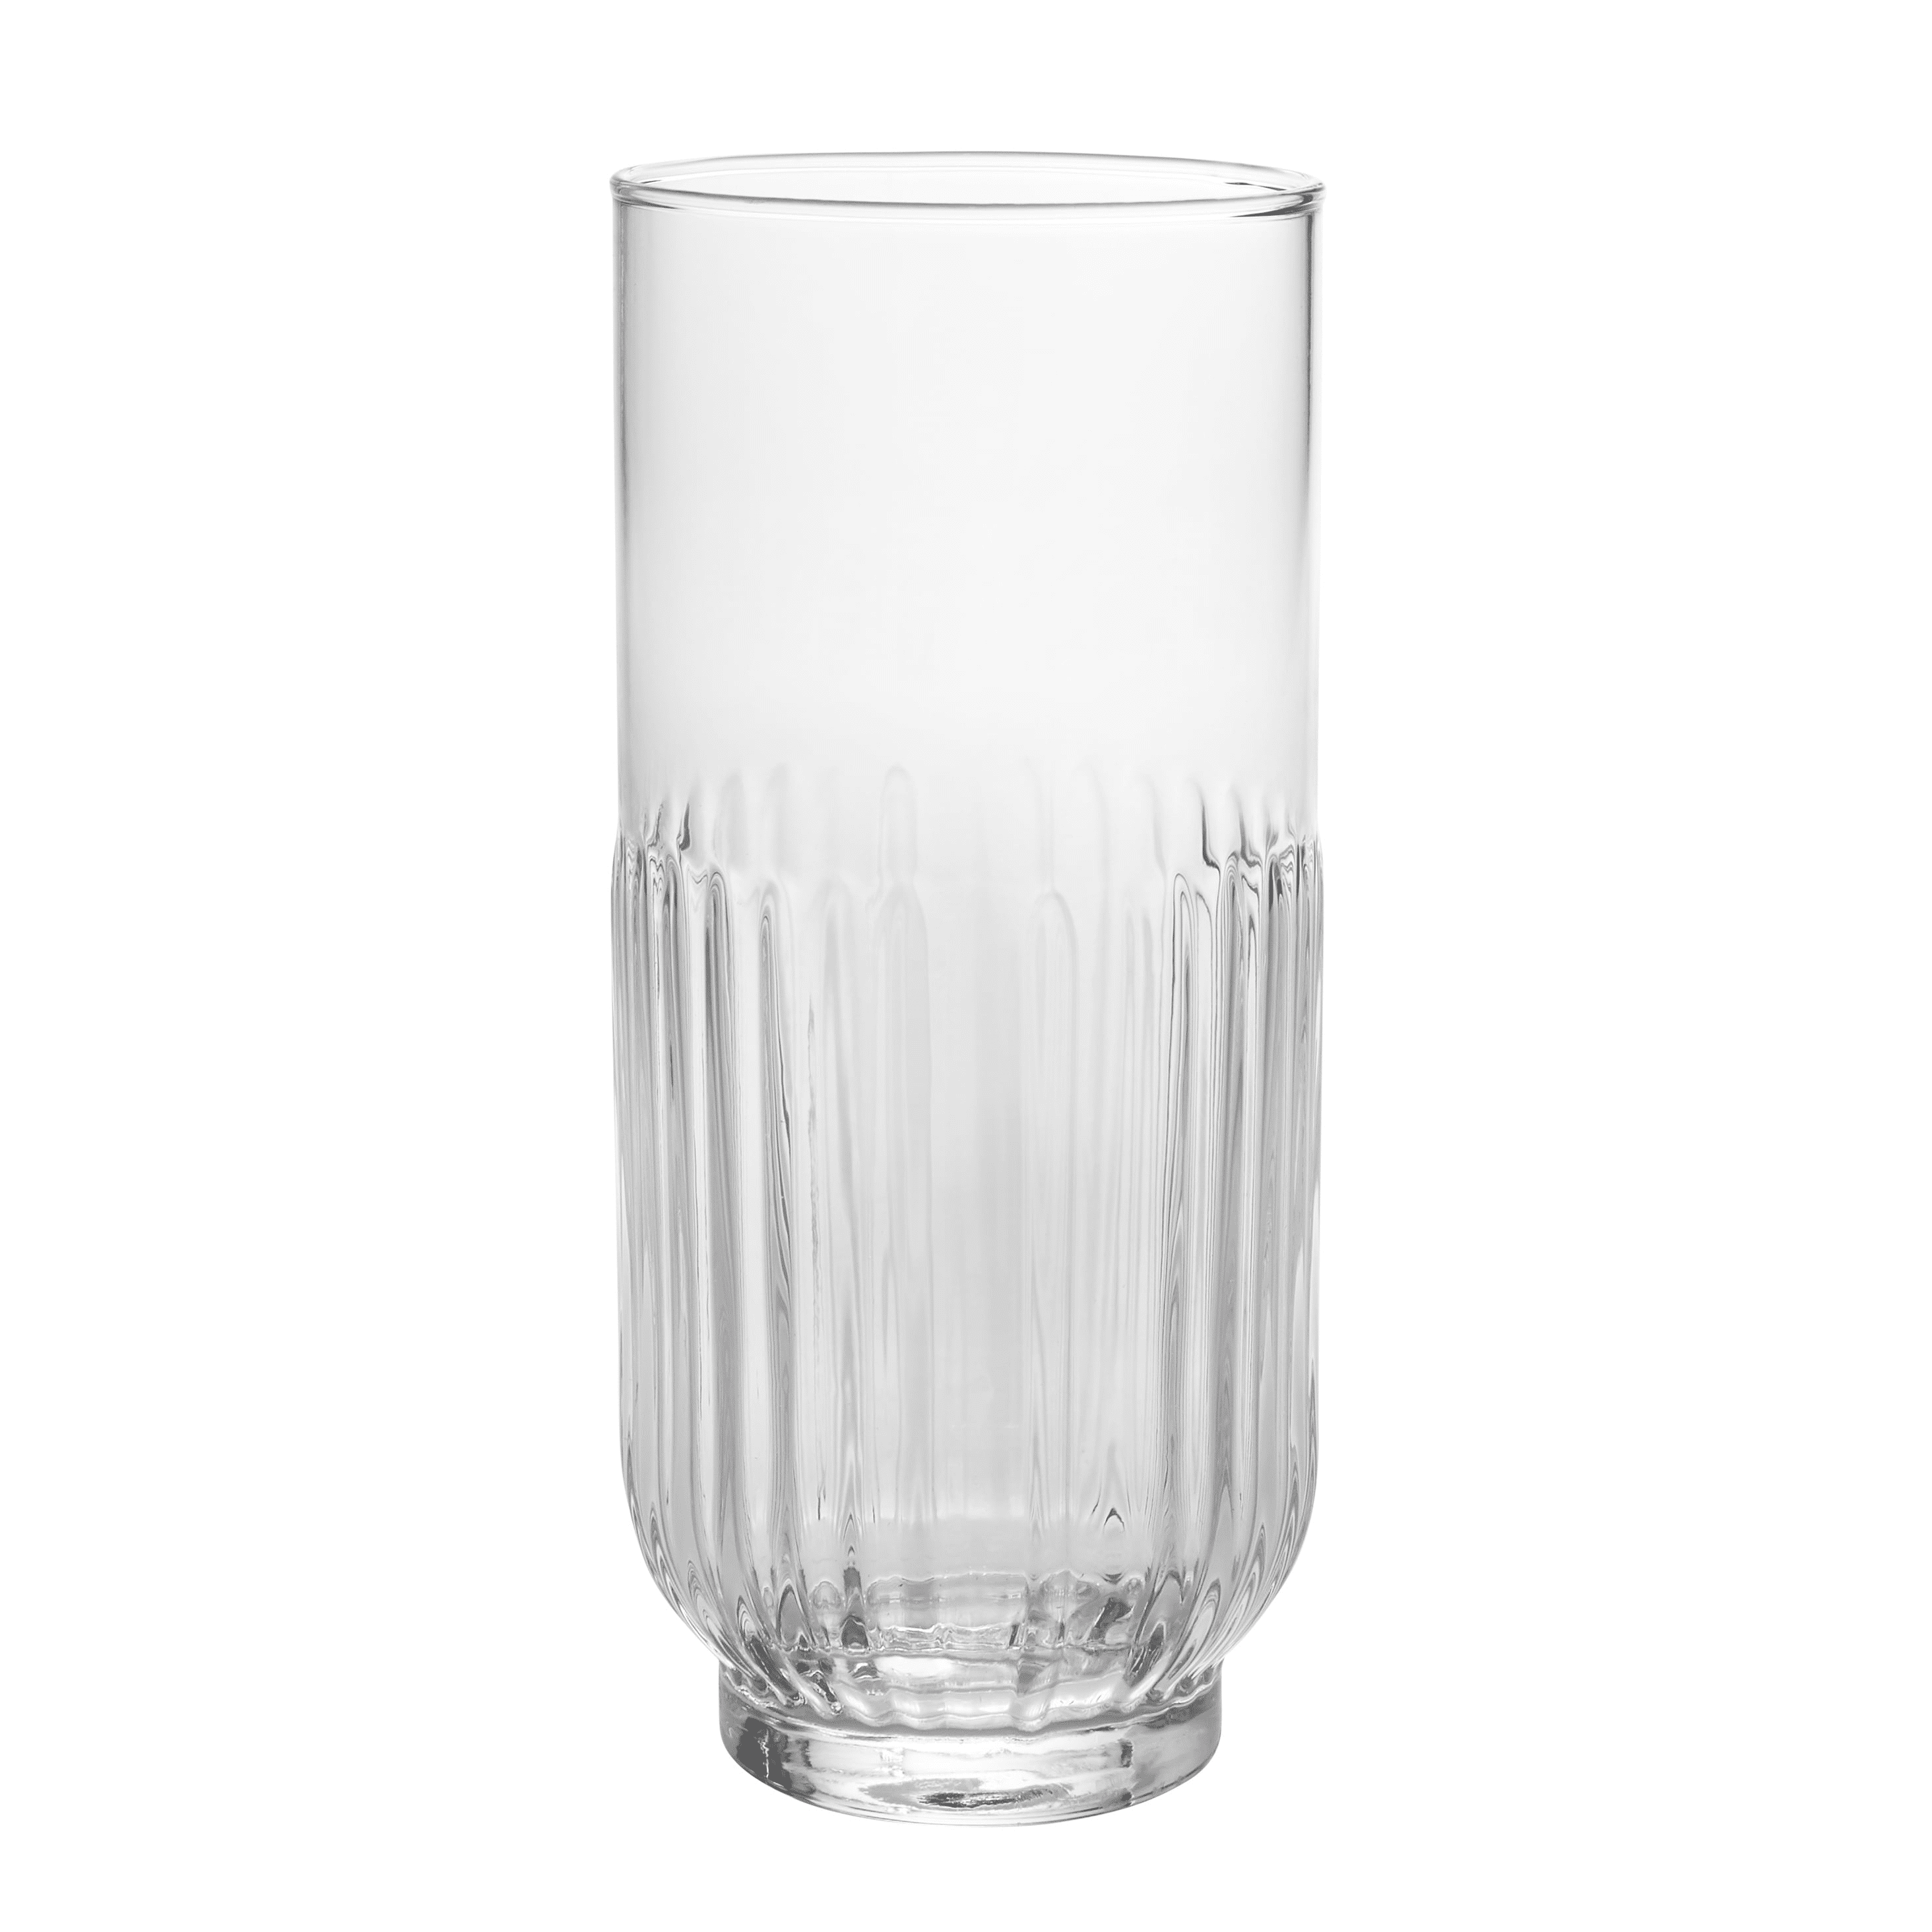 Bergen™ Fused Glass High Ball Glasses (set of 4) - texxture